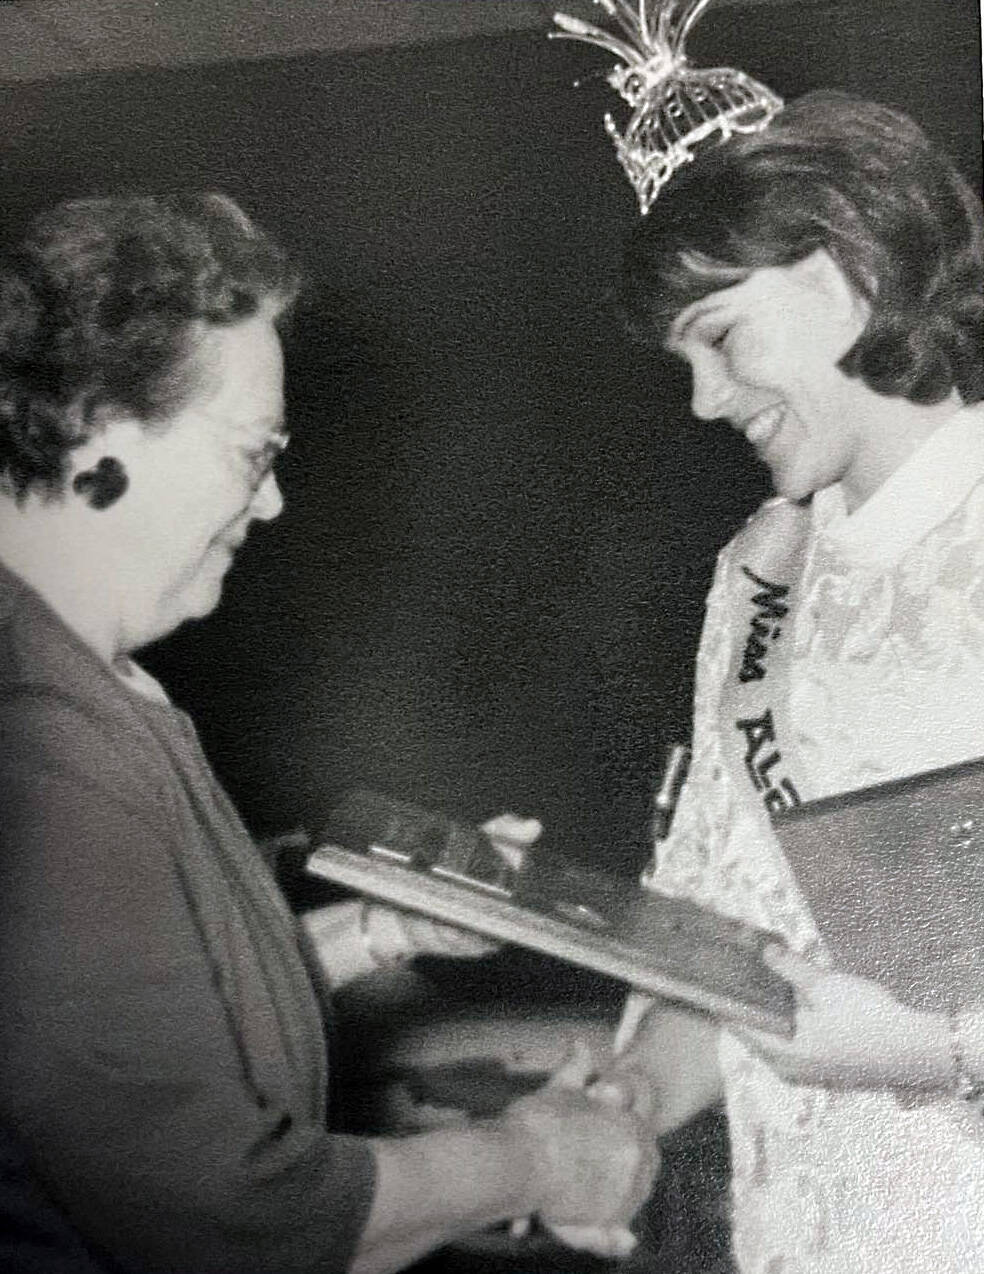 photo courtesy of the Smith Family Collection
Mary Ruth Nidiffer (Miss Alaska 1965) hands Mable Smith a plaque of appreciation for Smith’s service to the Alaska Purchase Centennial Celebration committee.